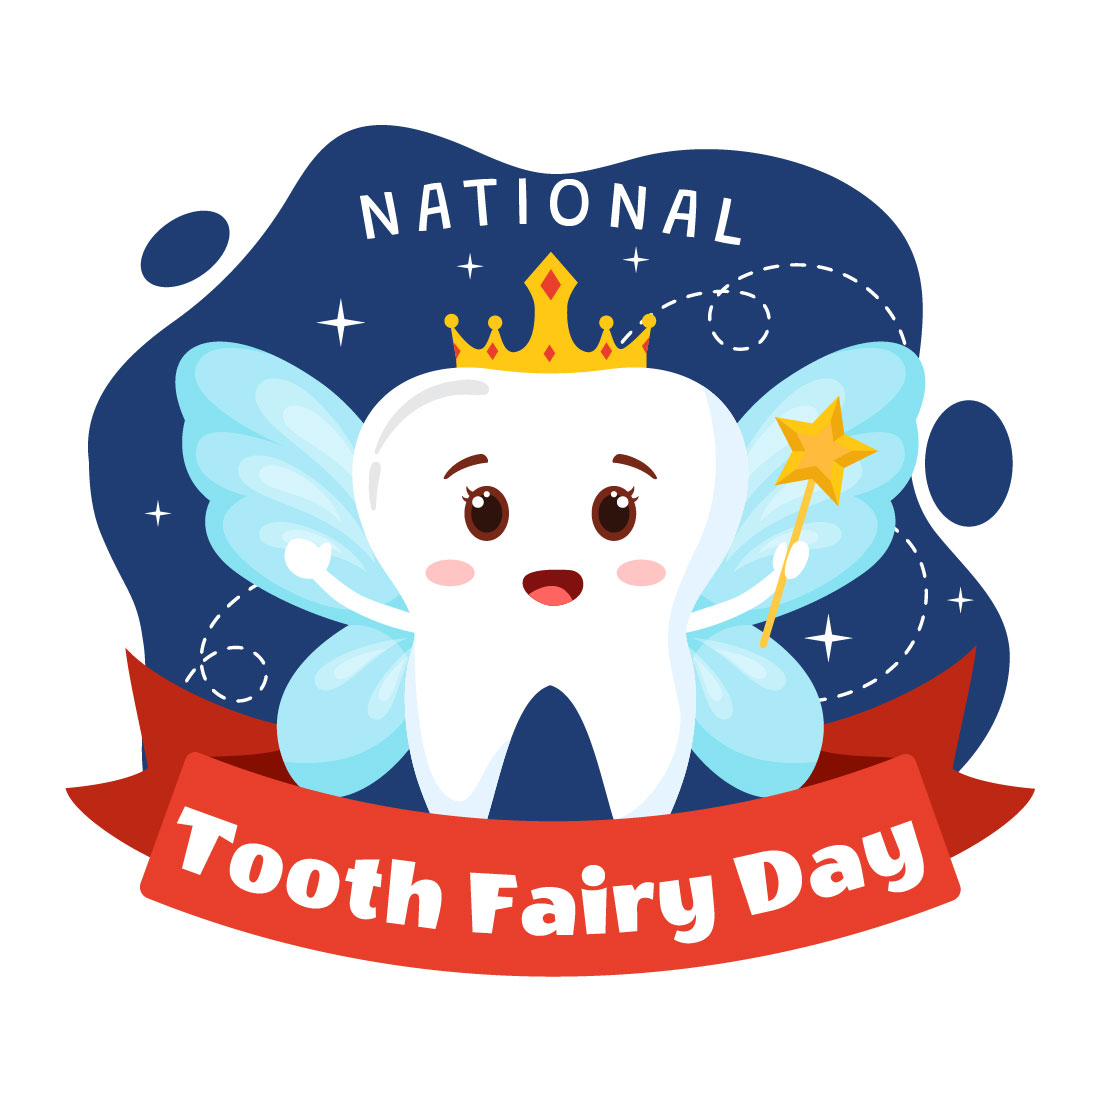 12 National Tooth Fairy Day Illustration preview image.